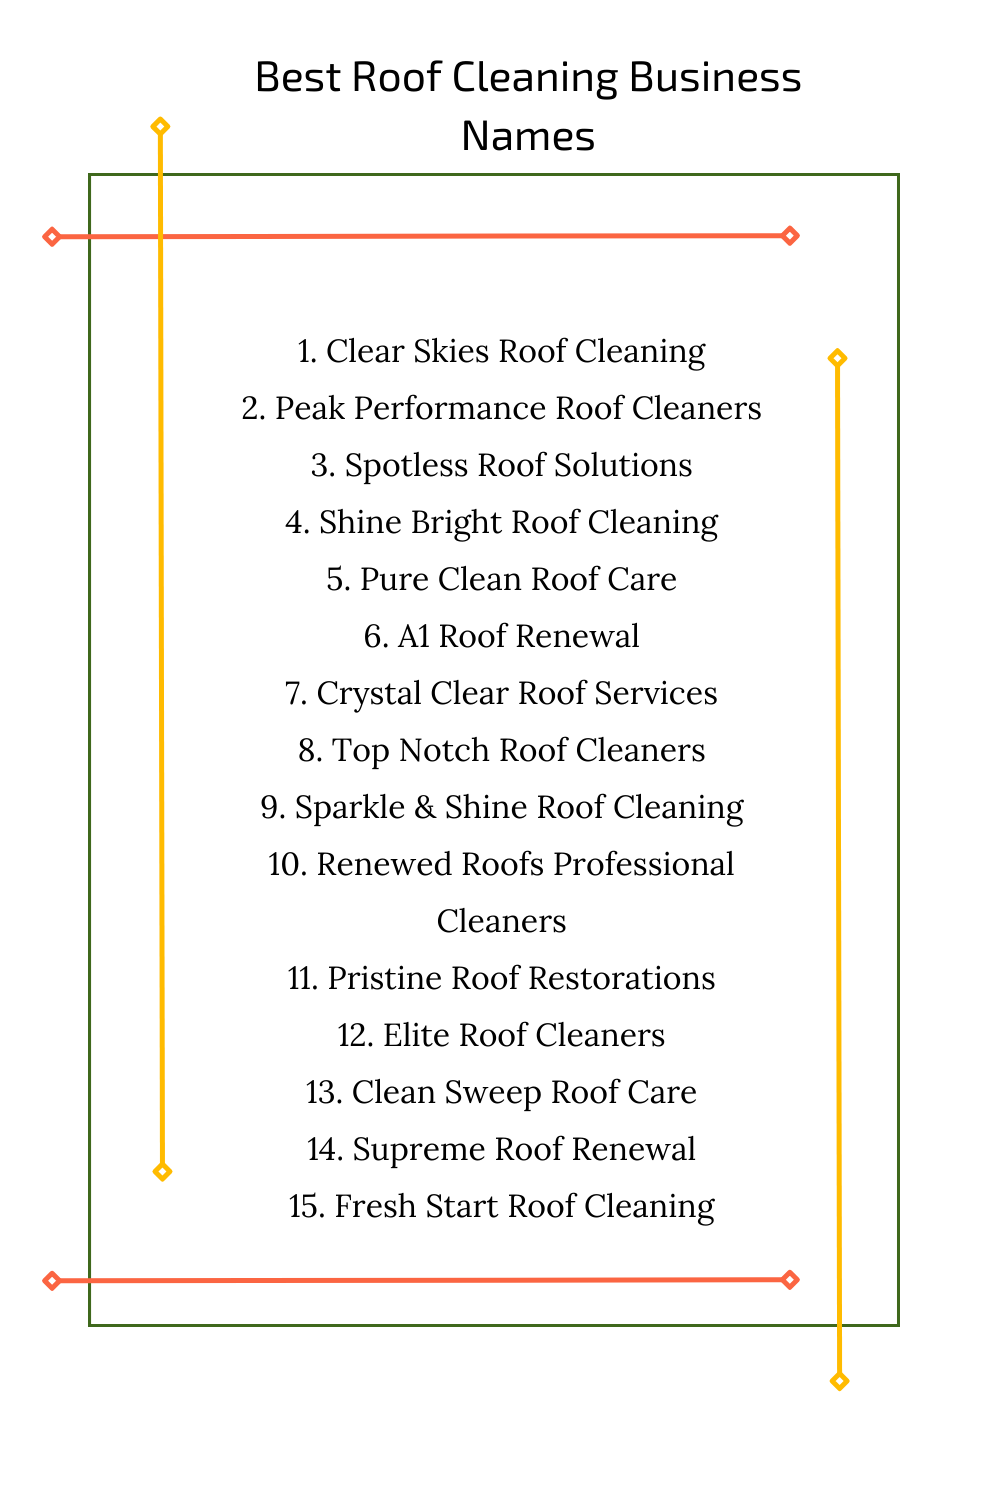 Best Roof Cleaning Business Names